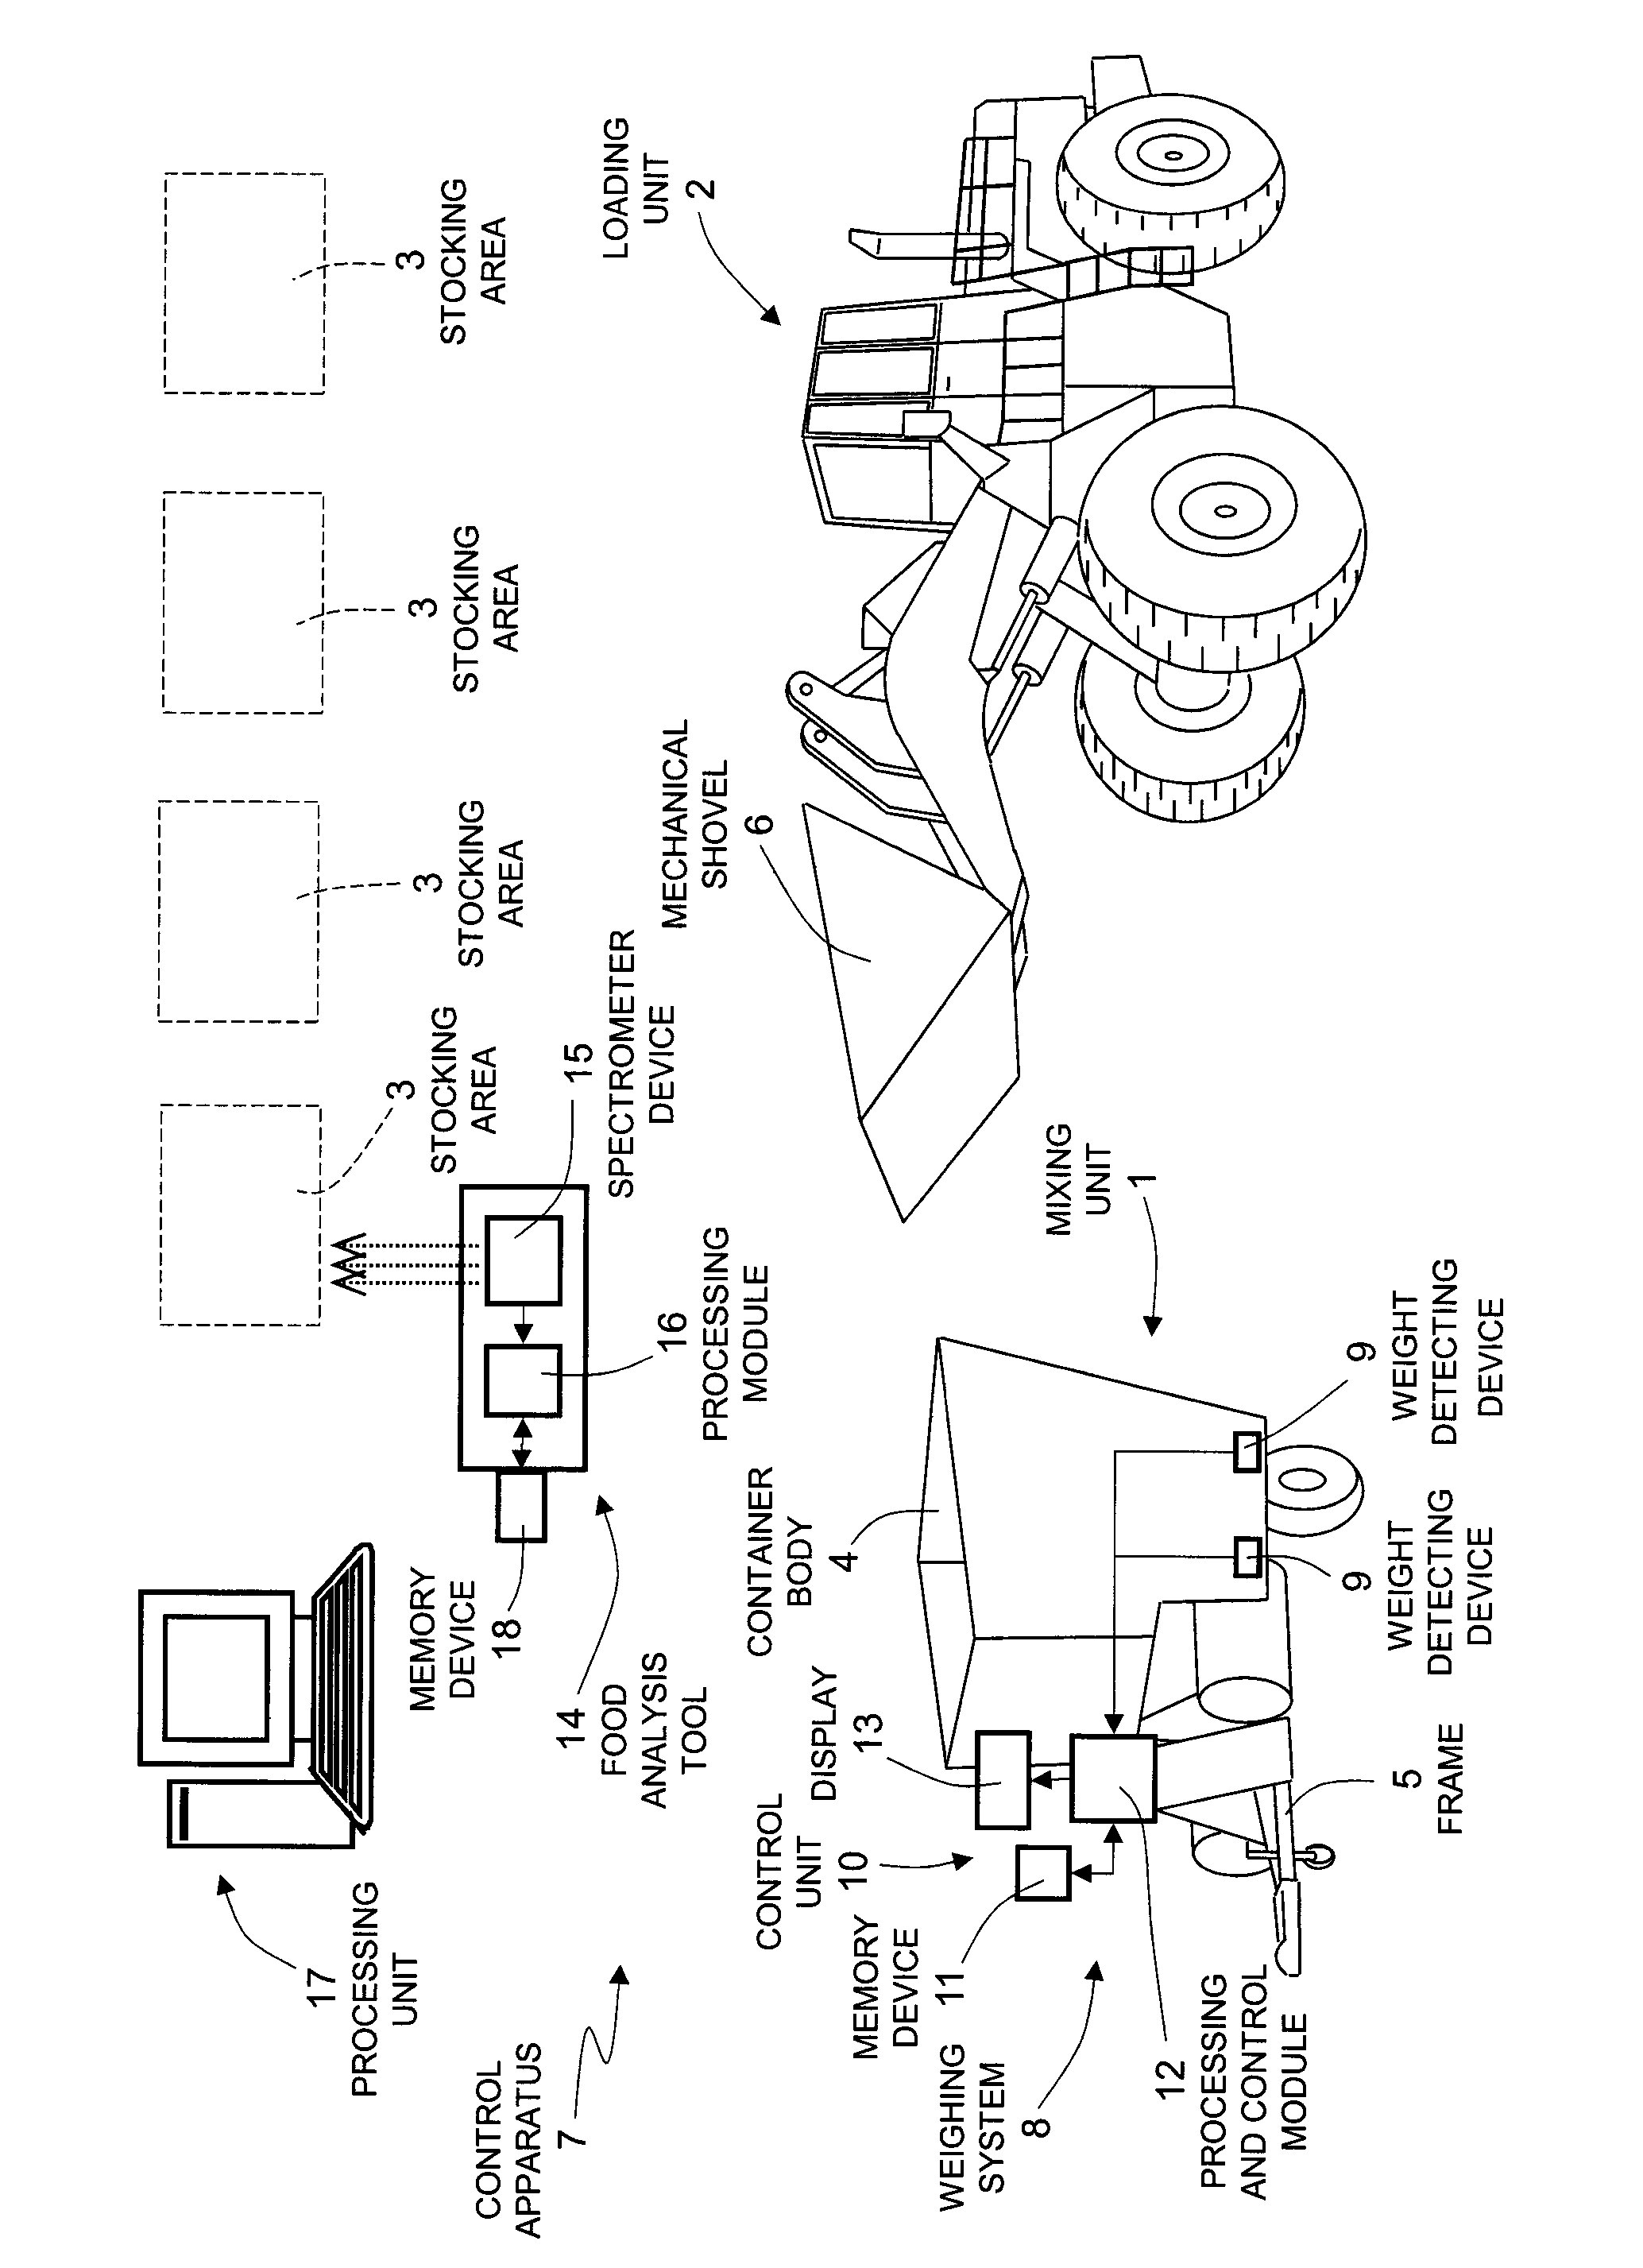 Method for controlling loading of foods in a food mixing unit and corresponding control apparatus